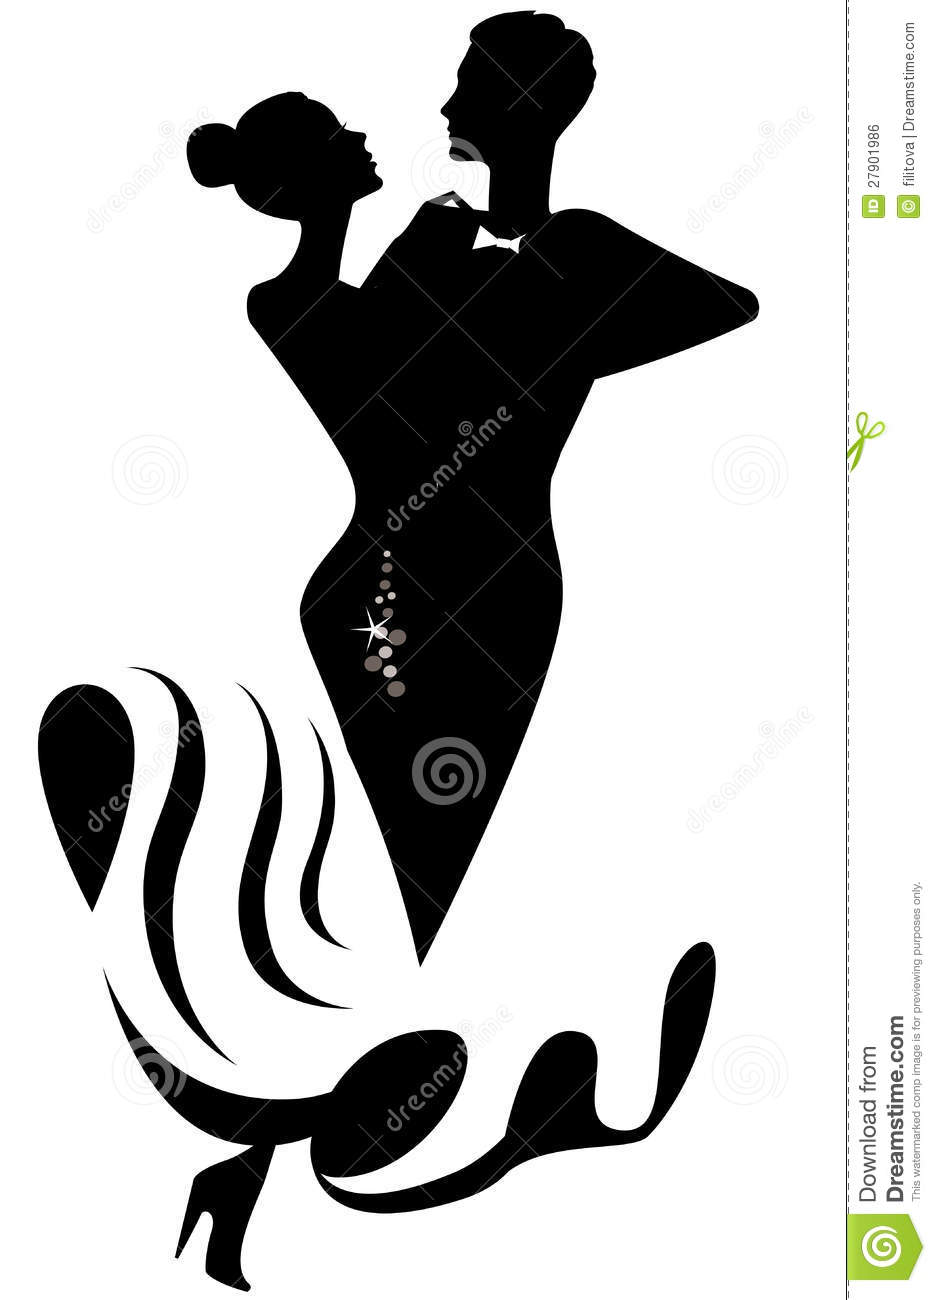 Black And White Vector Illustration Of A Silhouette Of Dancing Couple